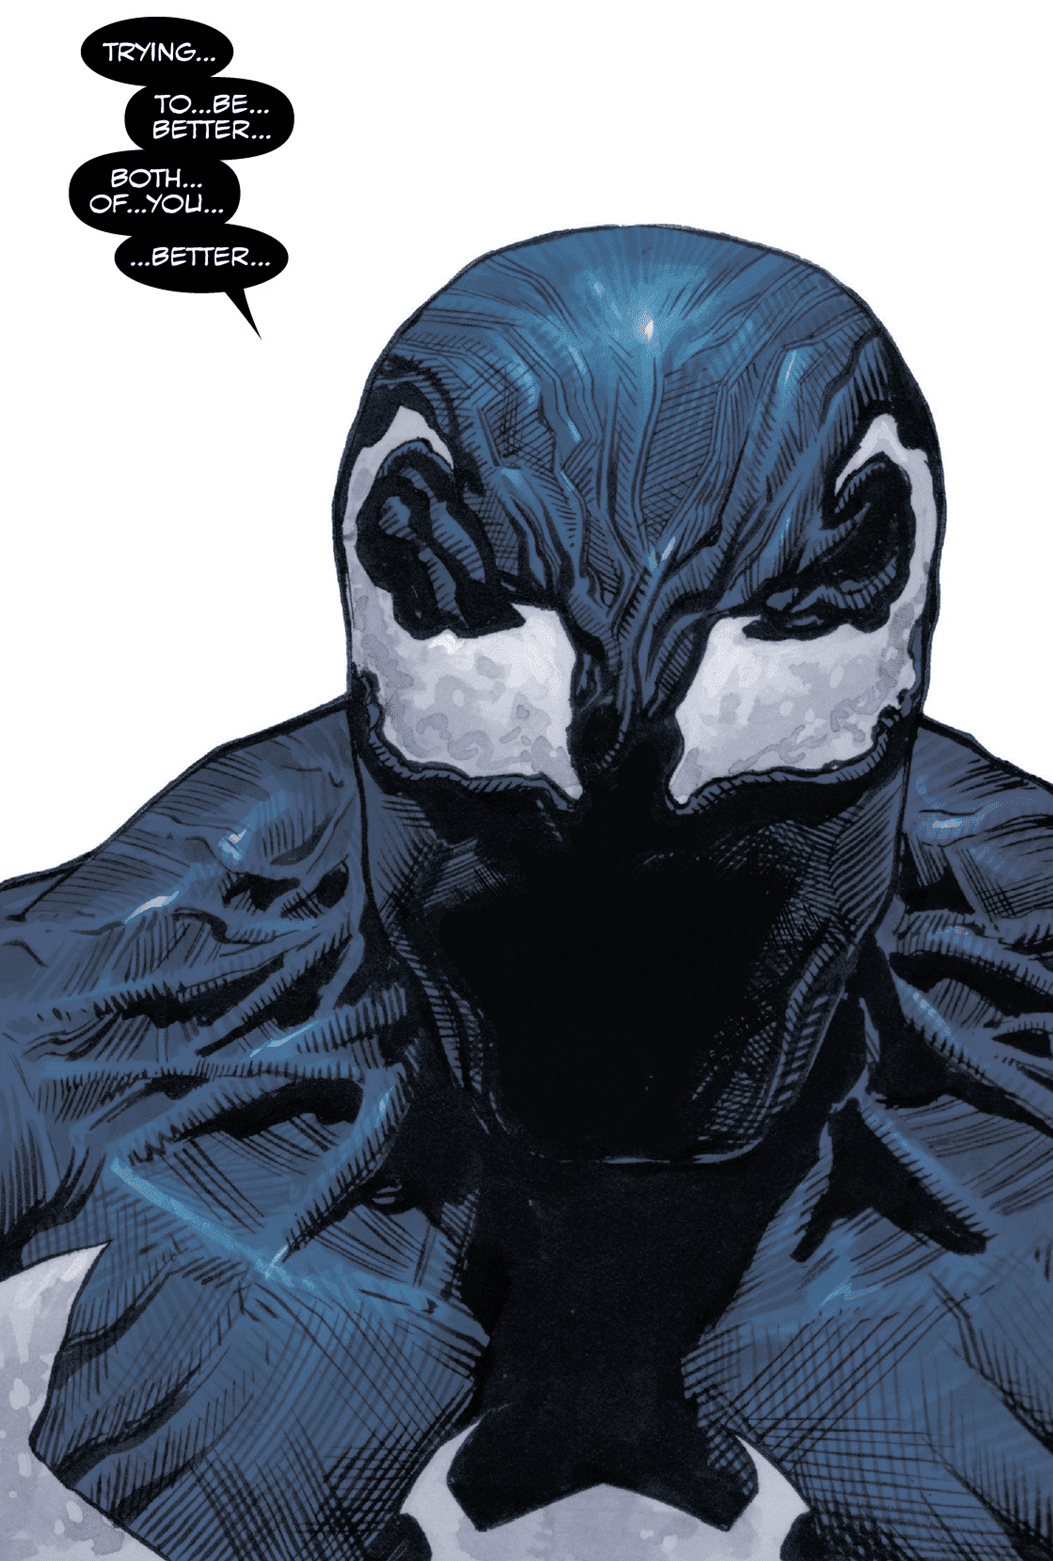 Comics and nothin' but — Venom v4 #12 (2019) pencil & ink by Joshua...